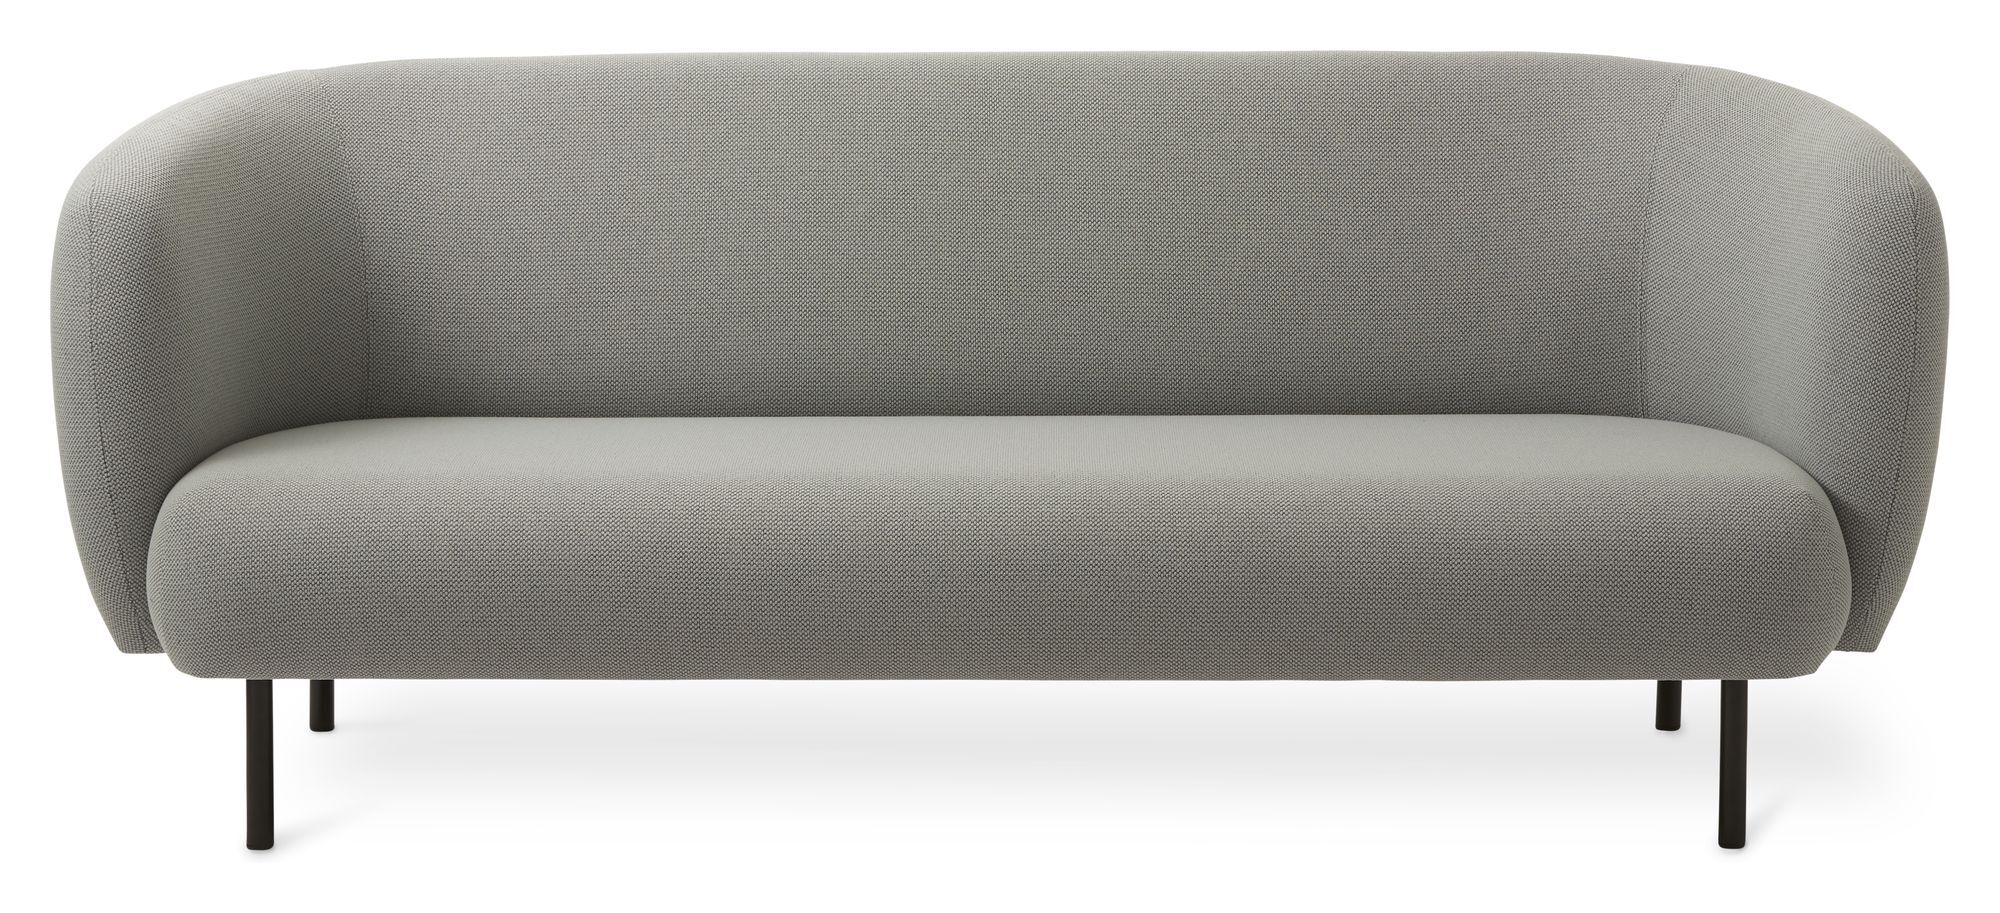 Warm Nordic CAPE 3-pers. Sofa, Minty Grey   Unoliving